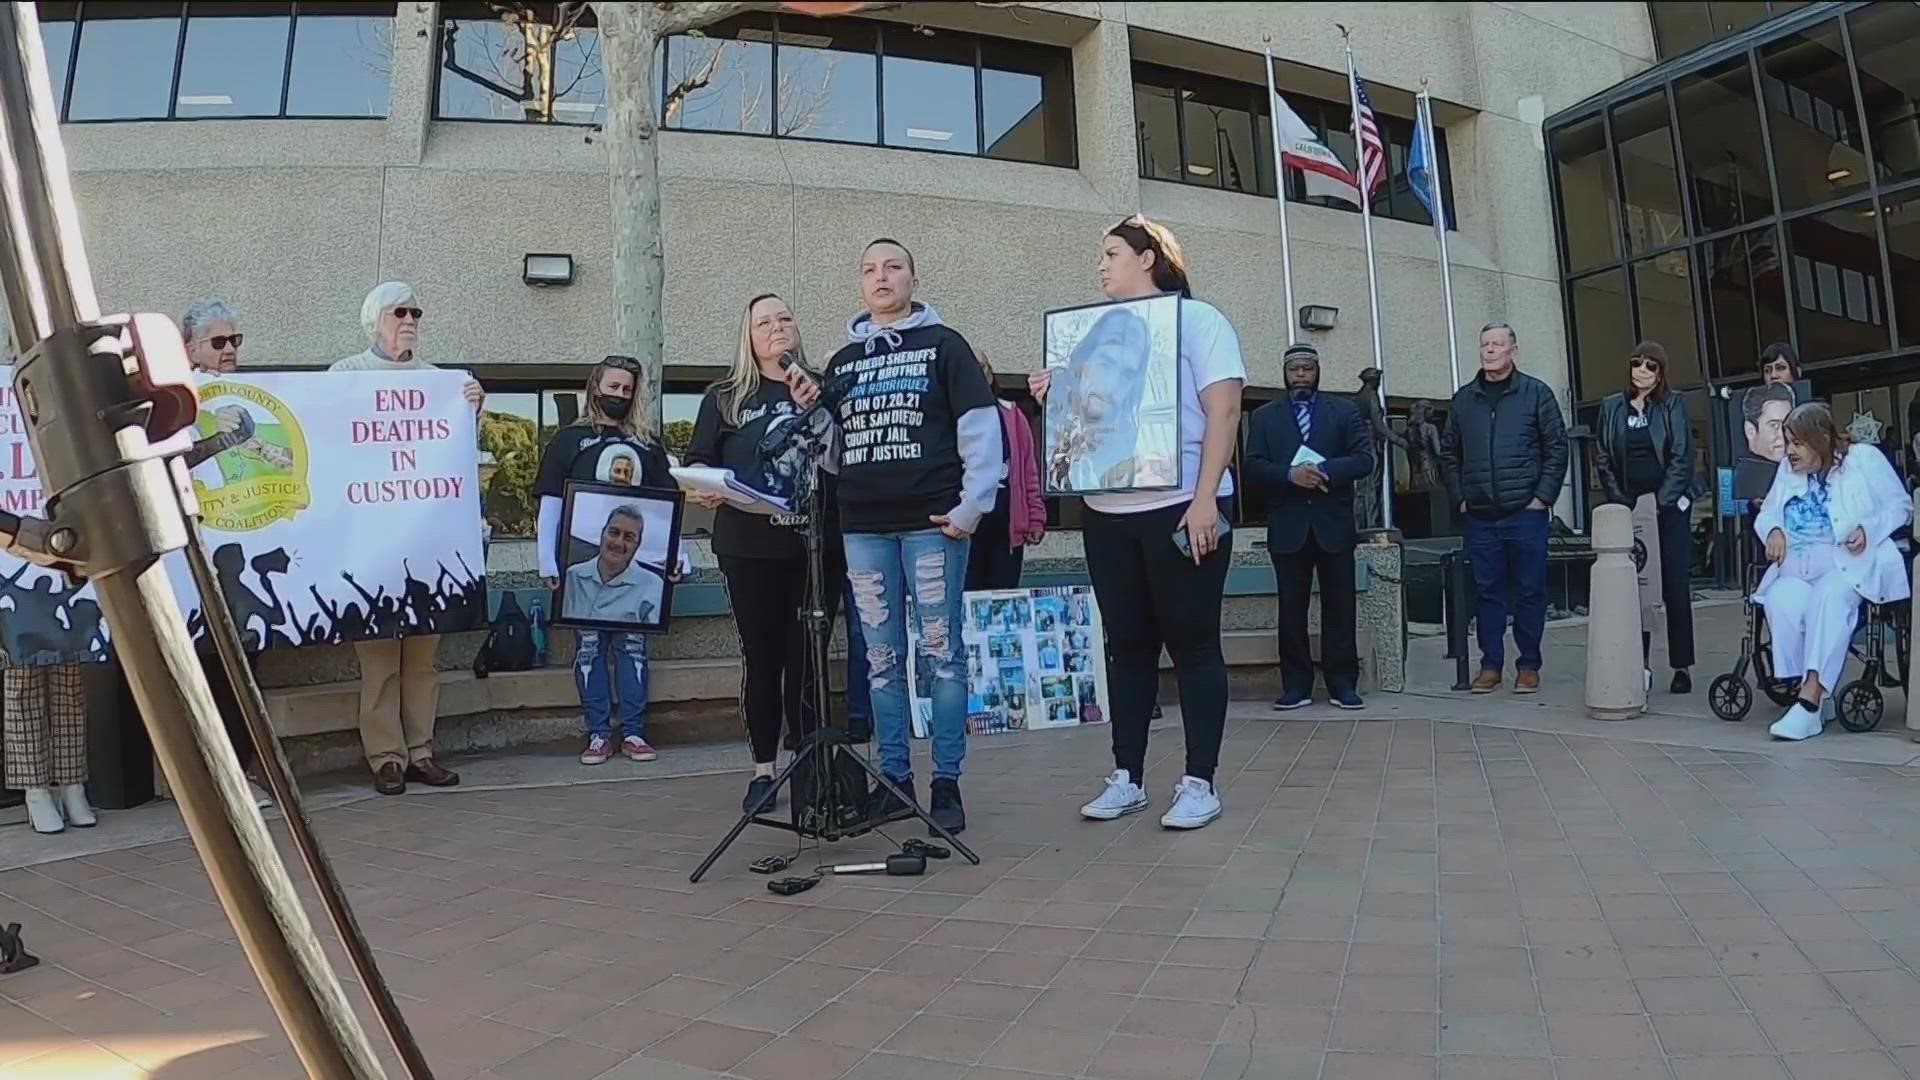 Members of Saving Lives in Custody spoke out against San Diego County Sheriff for failing to act on jail deaths.